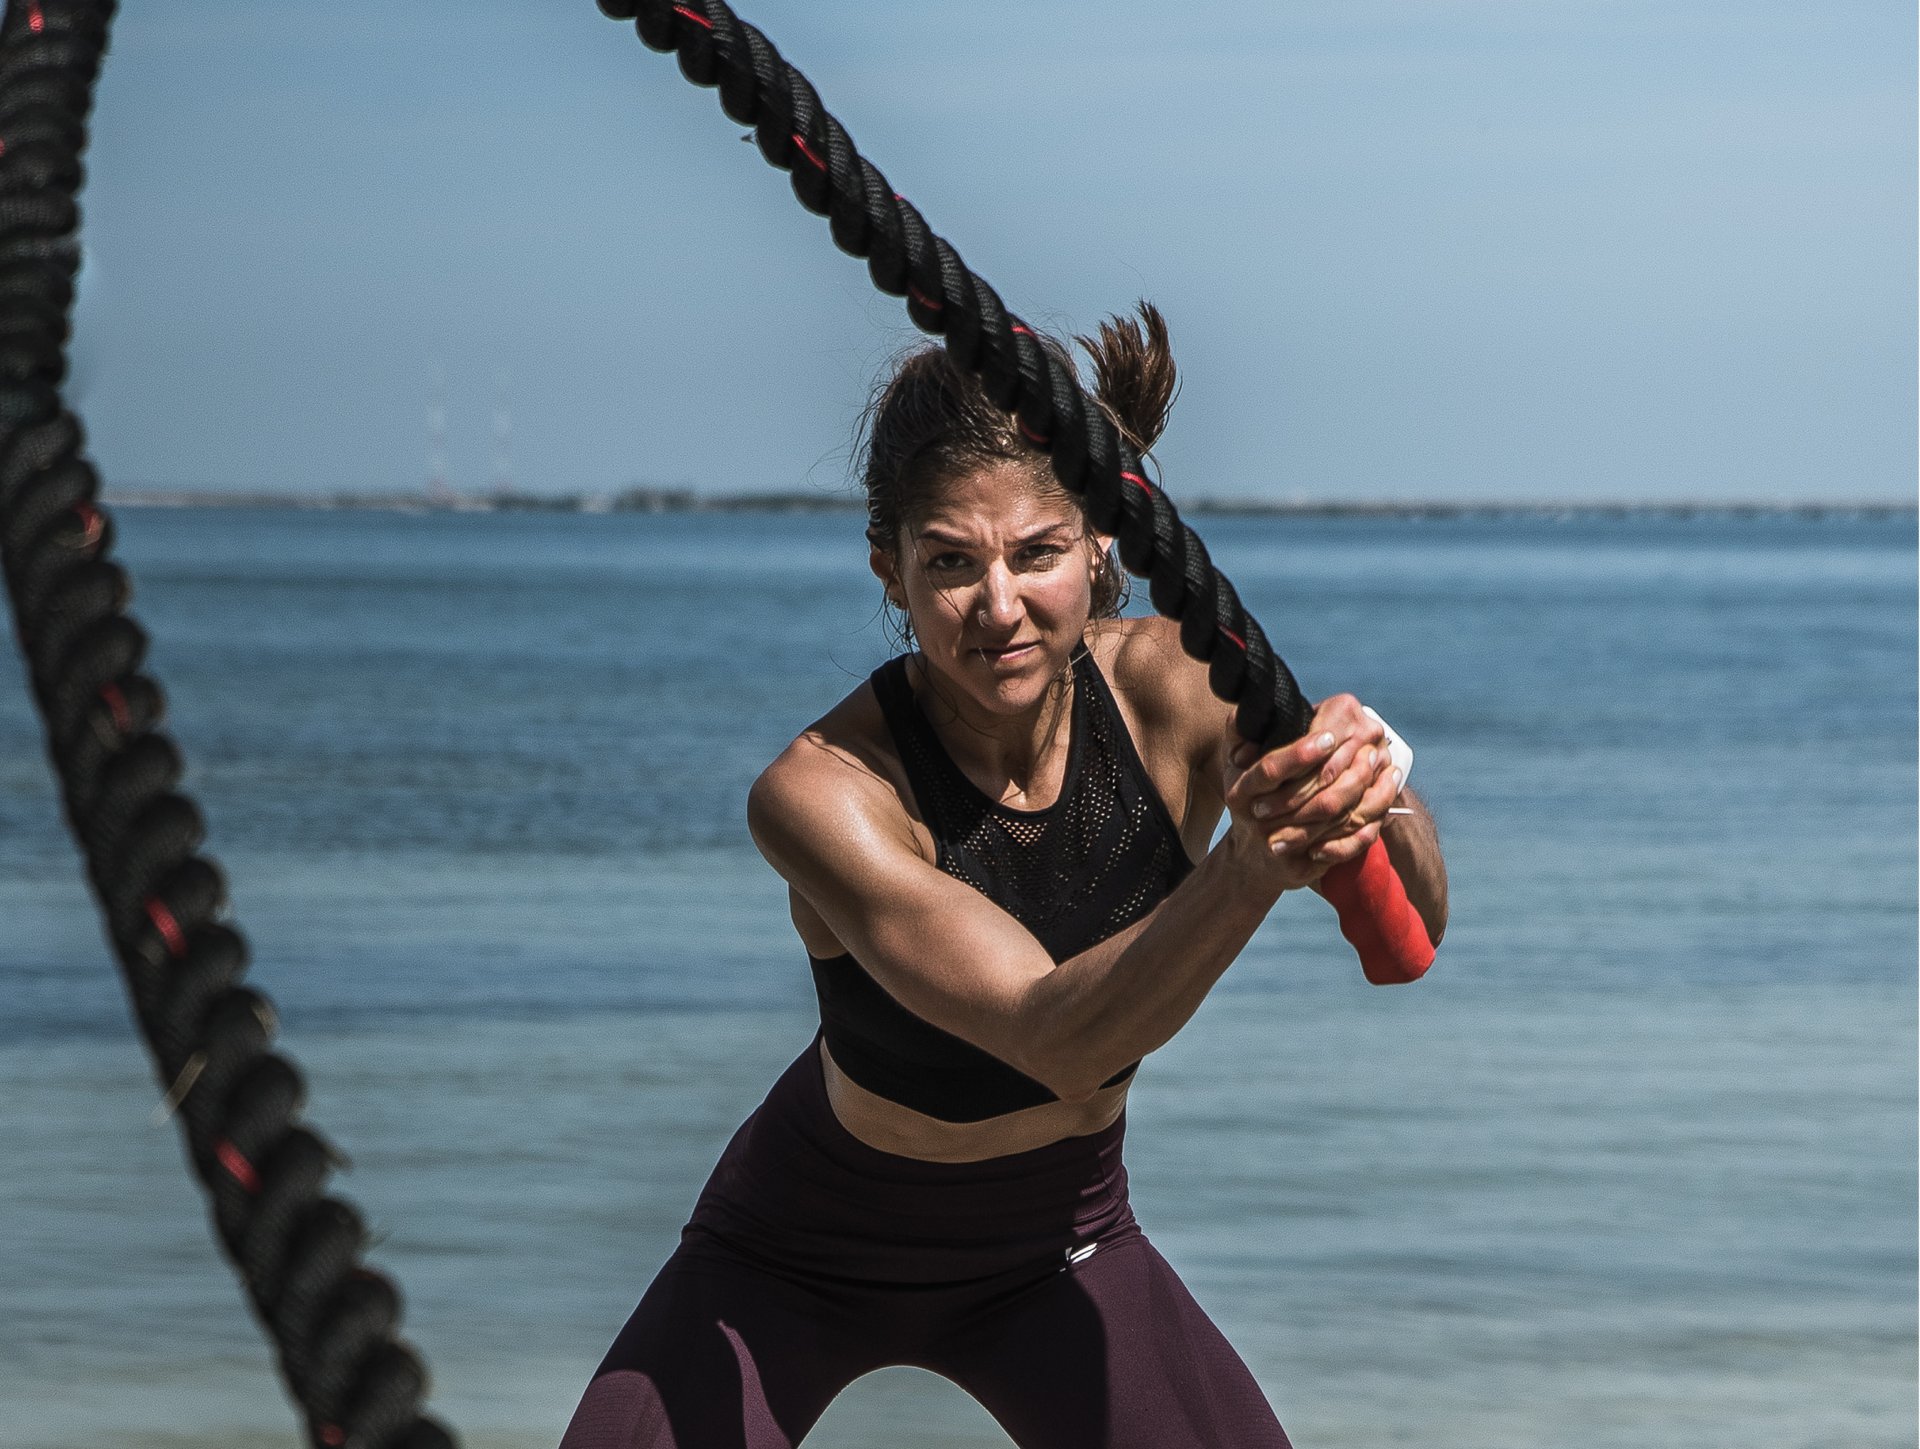 Battle Ropes – Shogun Sports If you're looking for high intensity, cardio blasting workouts, then look for the battle ropes by Shogun Sports. These ropes are helpful to build core strength and improve core-to-extremity strength. For more details, visit: https://shogunsports.com/ by shogunsports